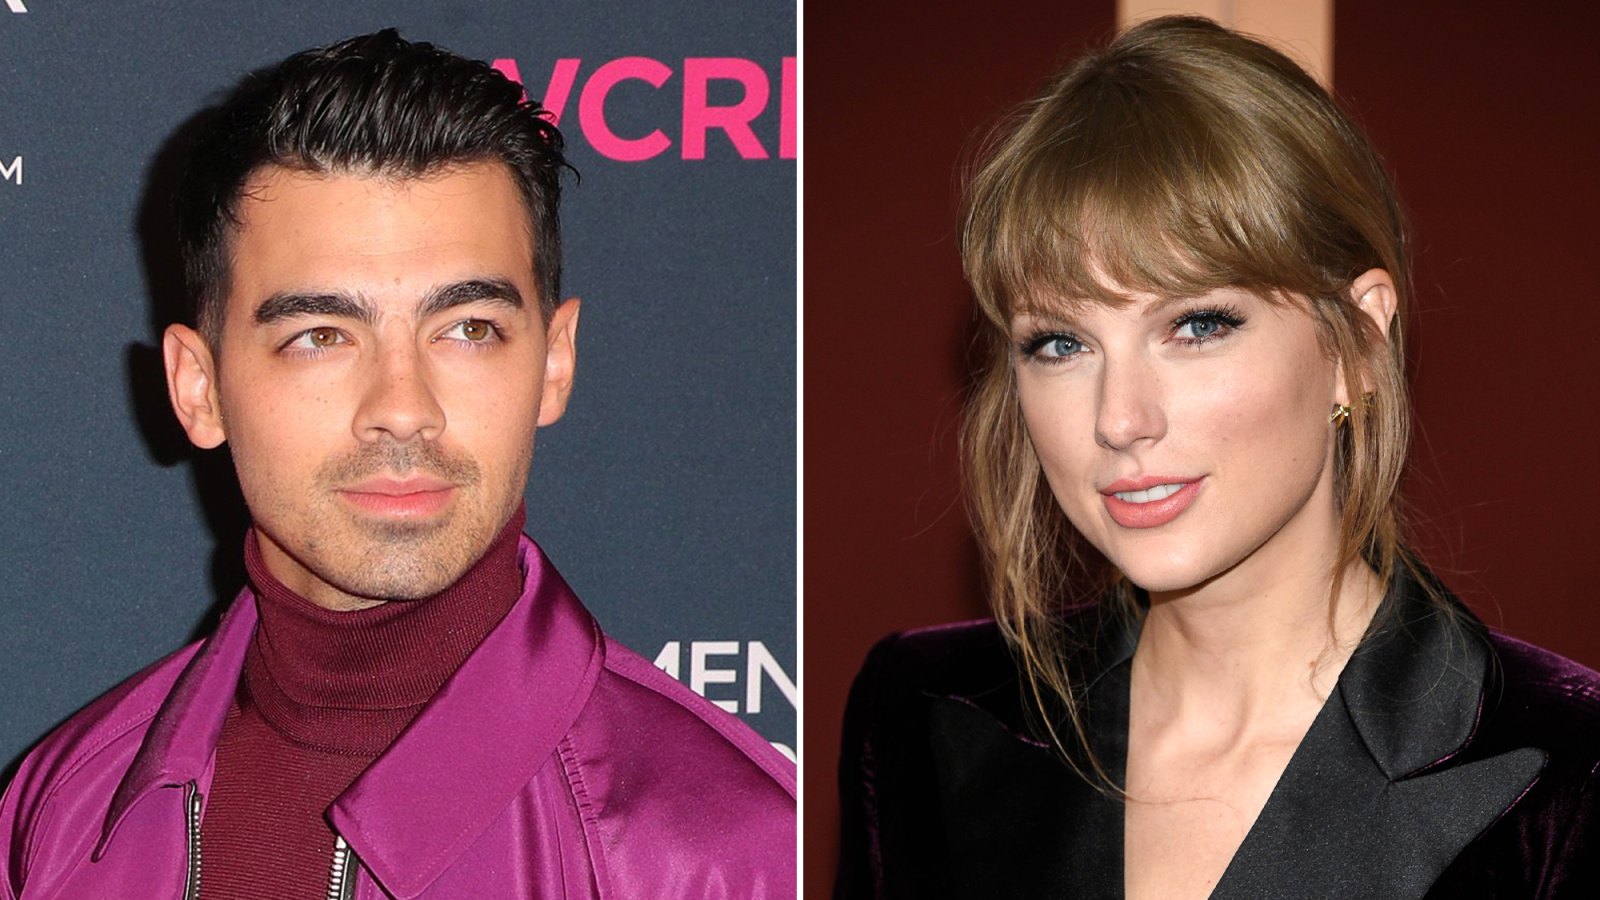 Fans Catch Joe Jonas Changing ‘Much Better’ Lyrics During Las Vegas Residency to Seemingly Support Ex Taylor Swift